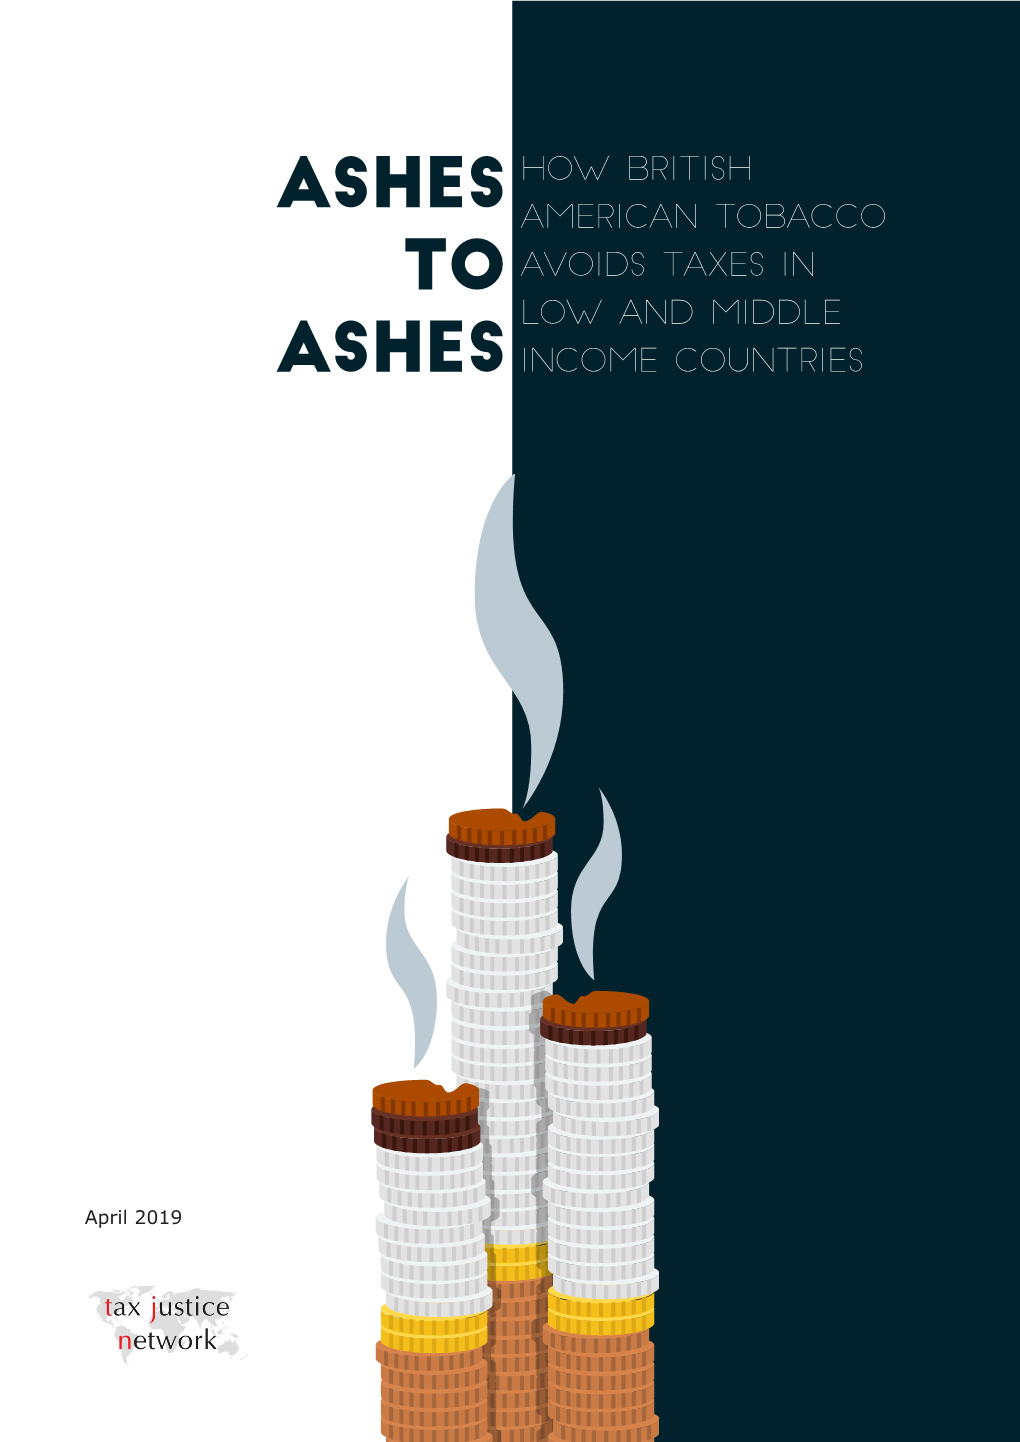 Ashes to Ashes: How British American Tobacco Avoids Tax in Low And